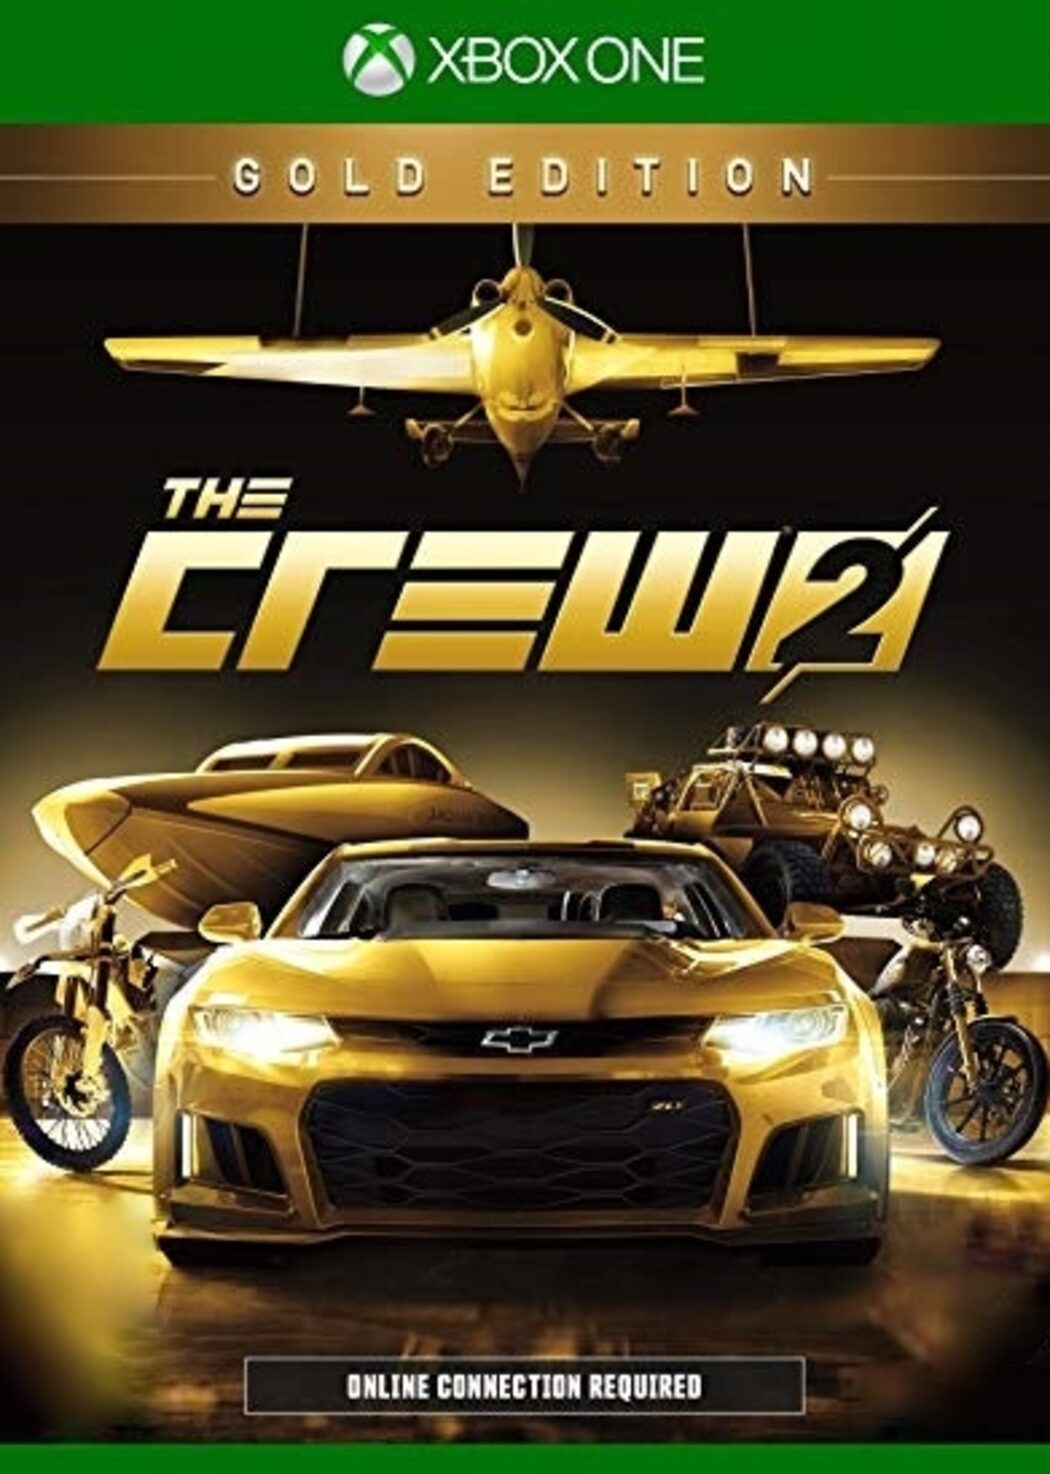 Do you need online for the crew?